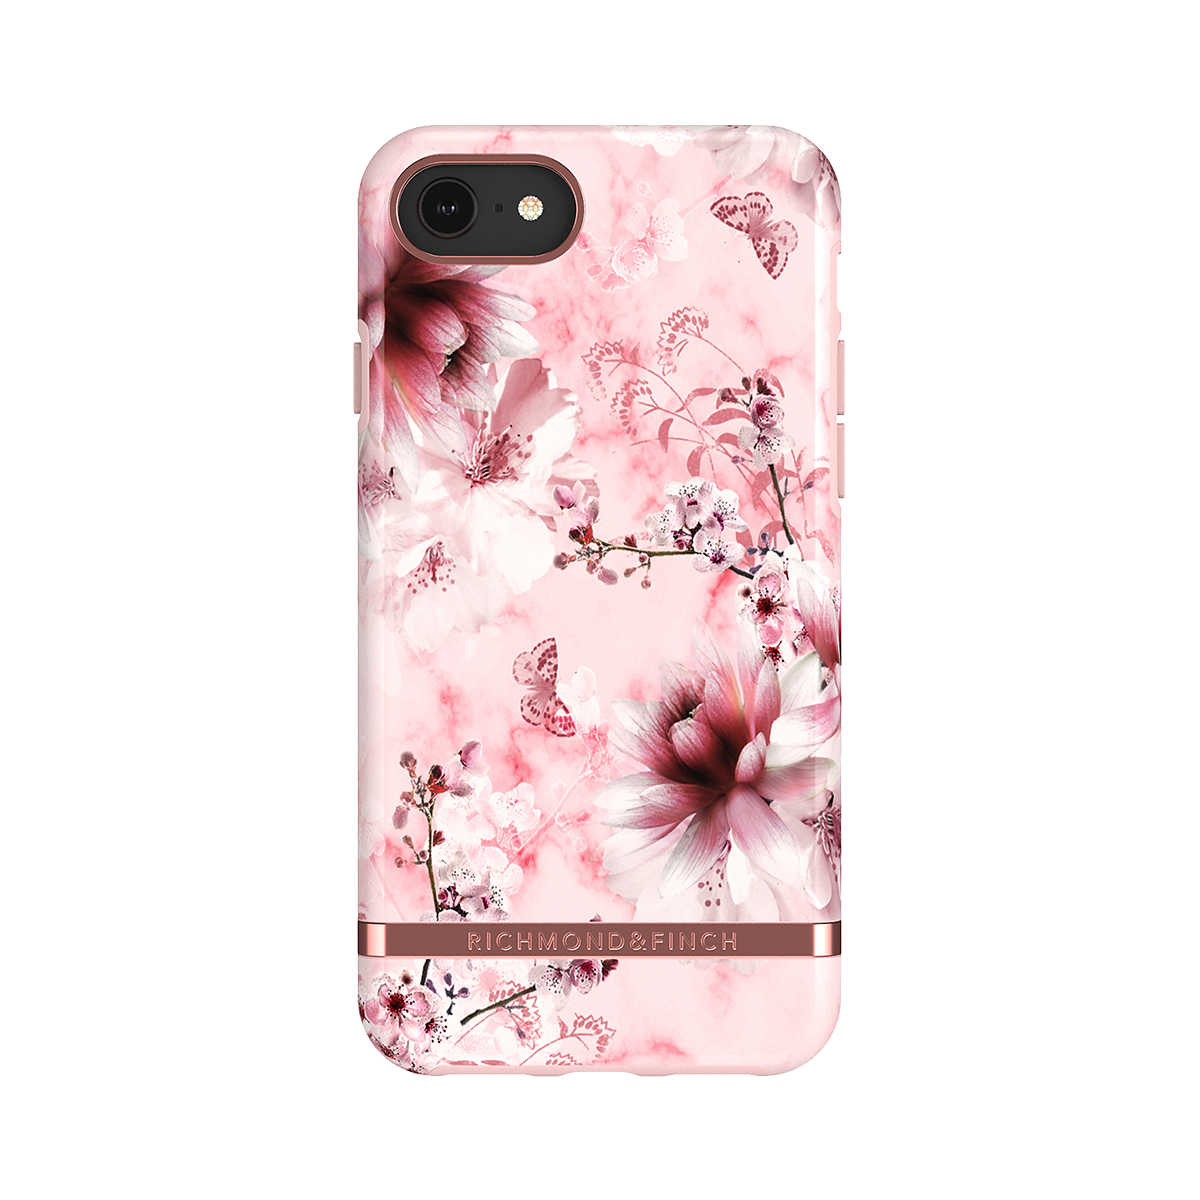 Richmond & Finch, Pink Marble Floral, skal för iPhone 6/6s/7/8